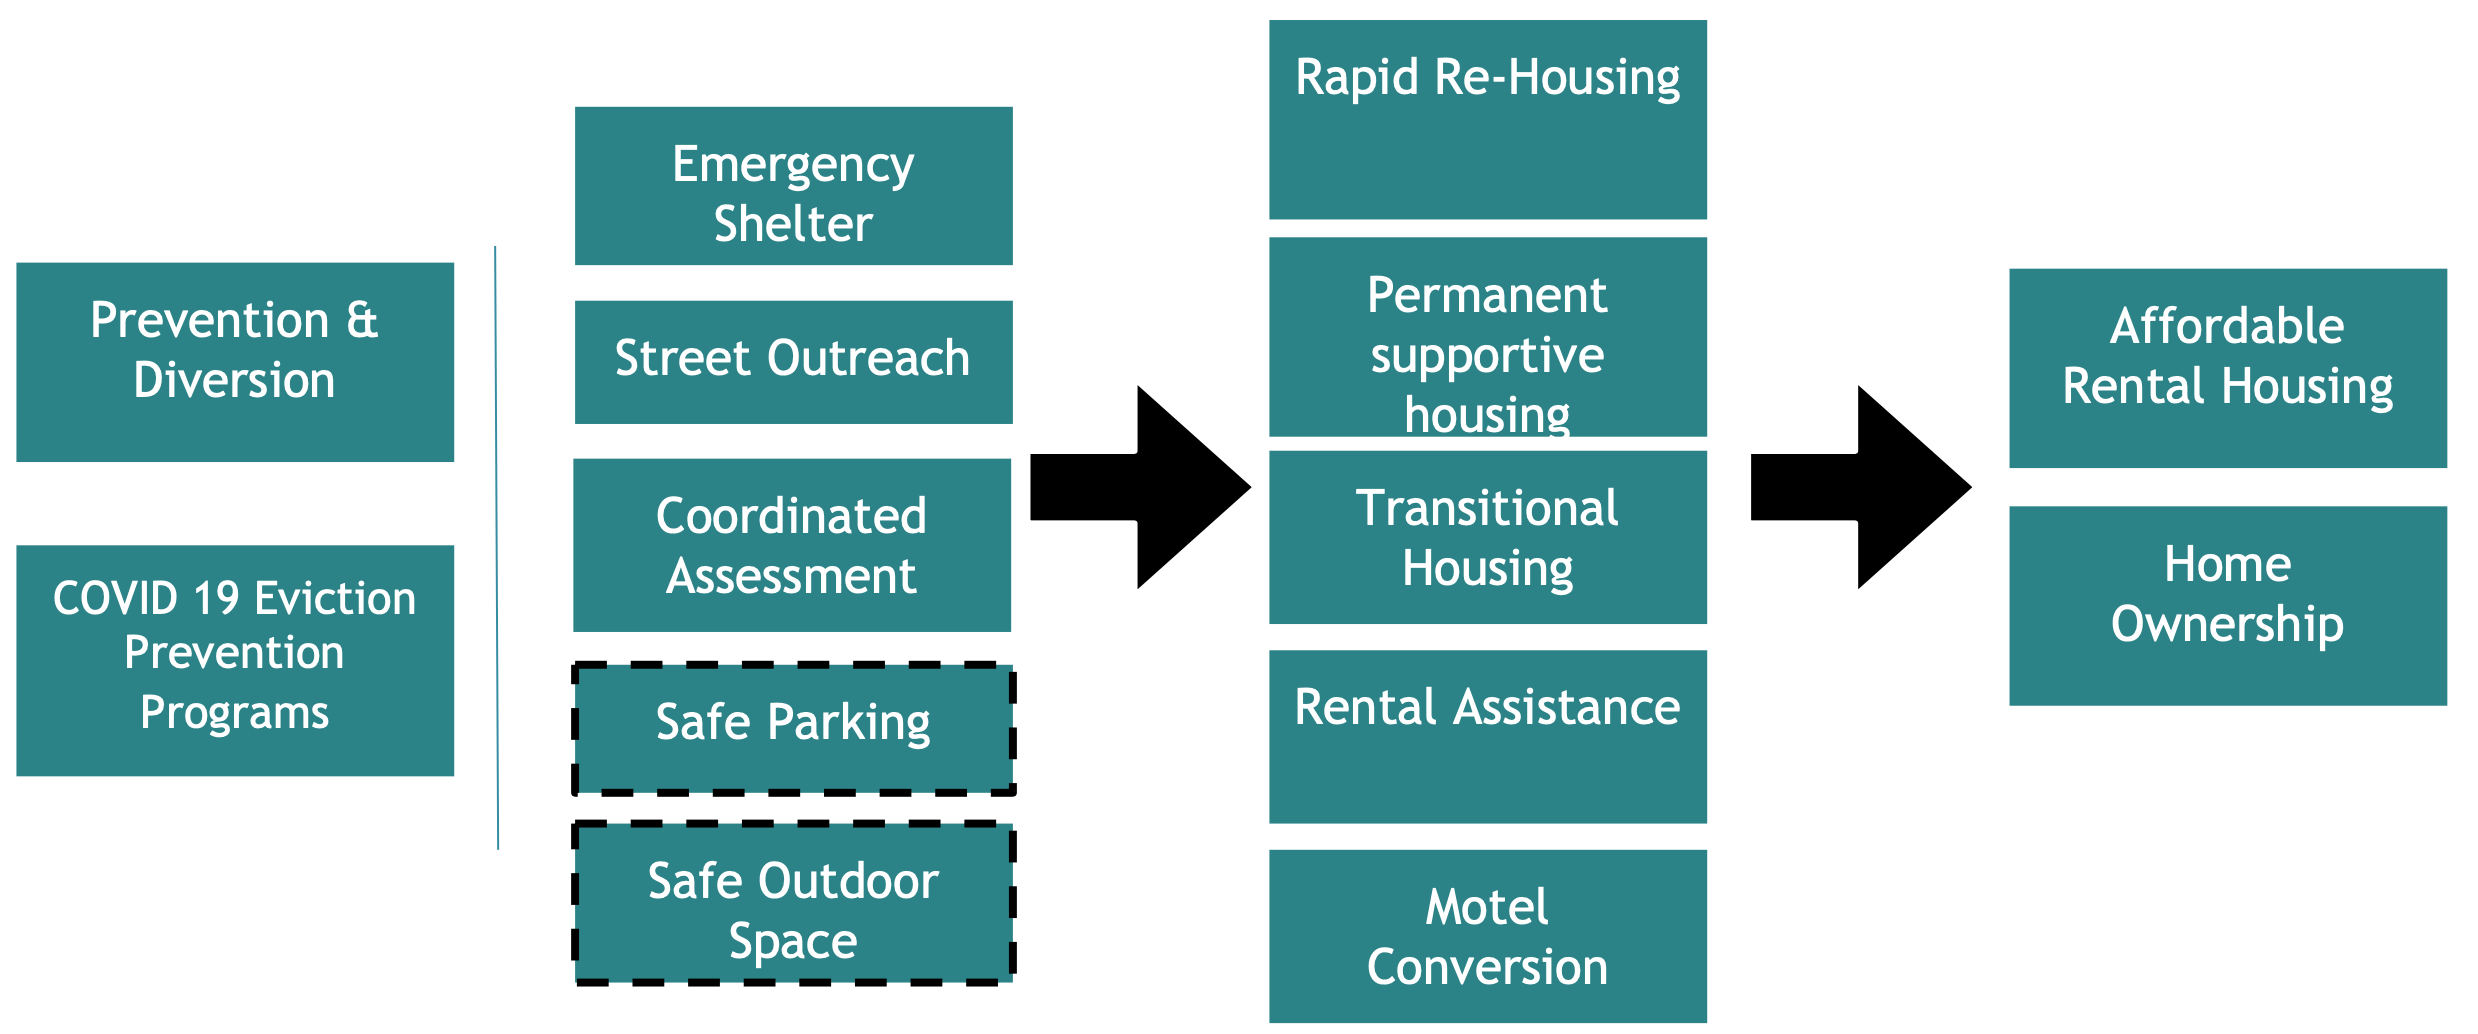 Homelessness system graphic. For assistance, please email marisol.atkins@gmail.com.